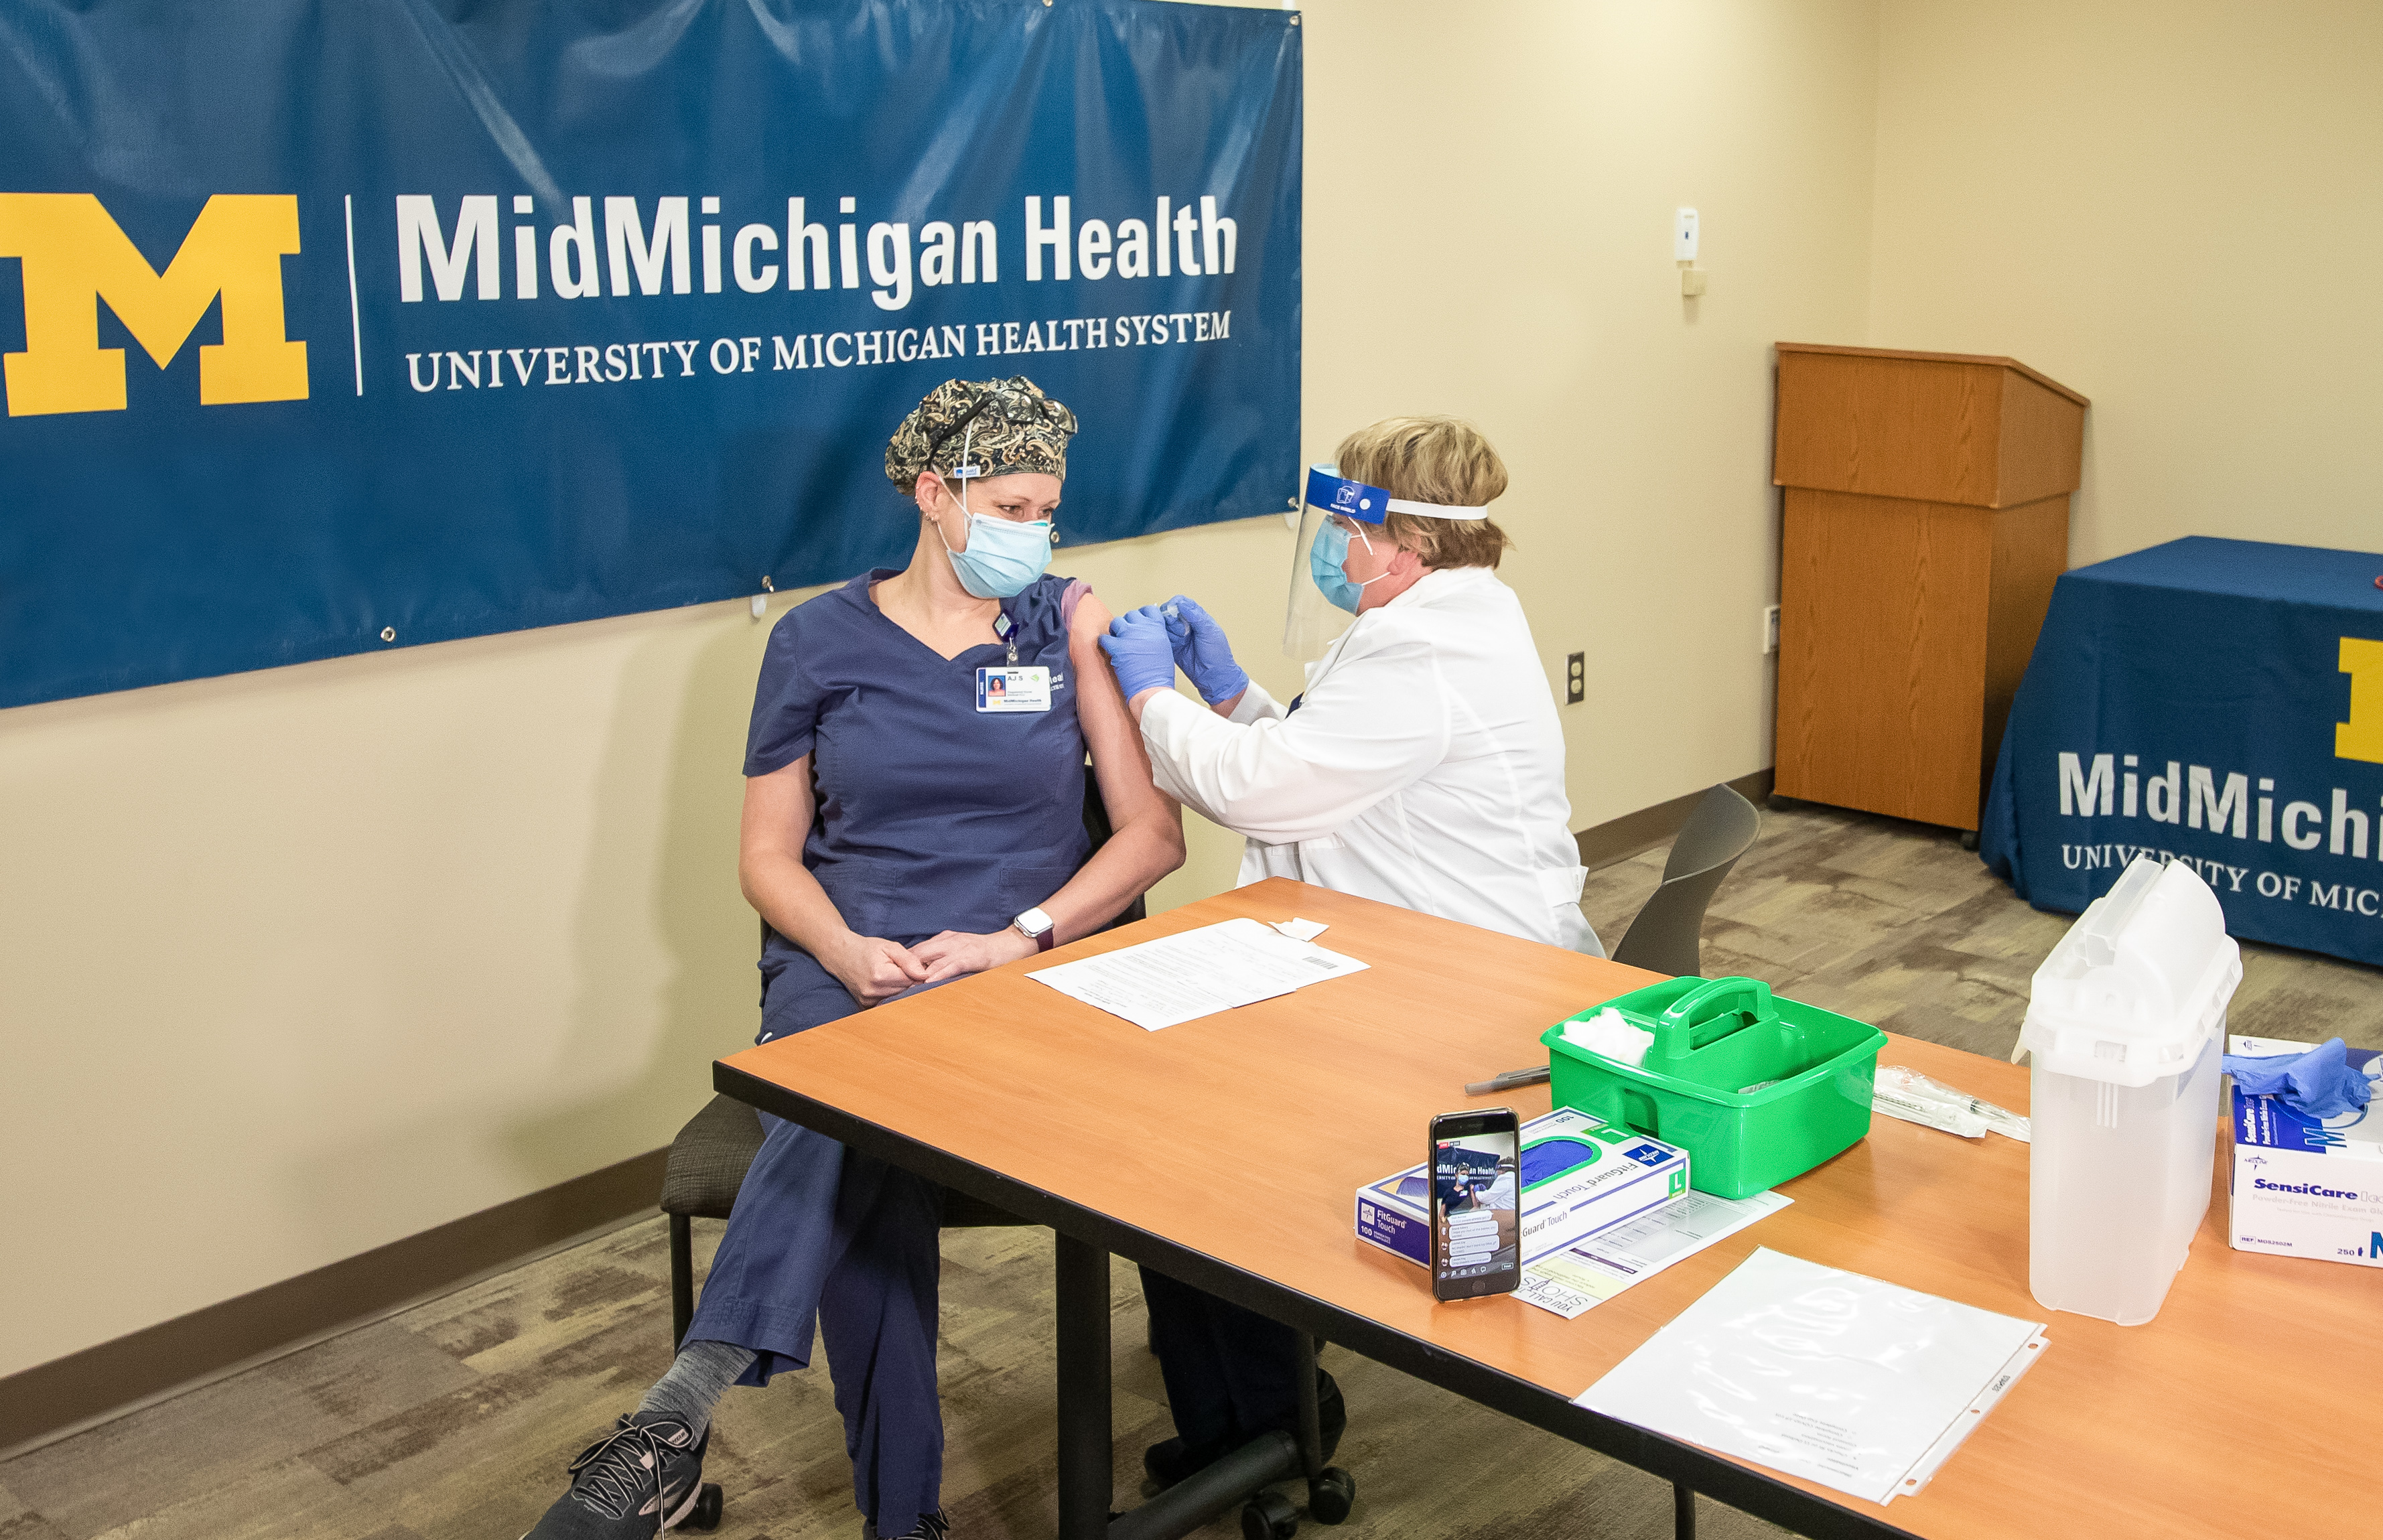 AJ Schafer, R.N., A Medical ICU Nurse, Of Weidman, Mich., Received The First COVID-19 Vaccine At MidMichigan Medical Center – Midland On Wednesday, Dec. 16.  “This Is An Exciting Time. It’s A New Start For Everyone,” Said Schafer. “I Think The Vaccine Will Help Alleviate The Fear Of The Common Cold, Even Allergies, The ‘what Ifs.’ The Vaccine Gives Us Confidence, And As More People Get Vaccinated, We Can Help Alleviate Those Fears. It Gives Us Hope.”